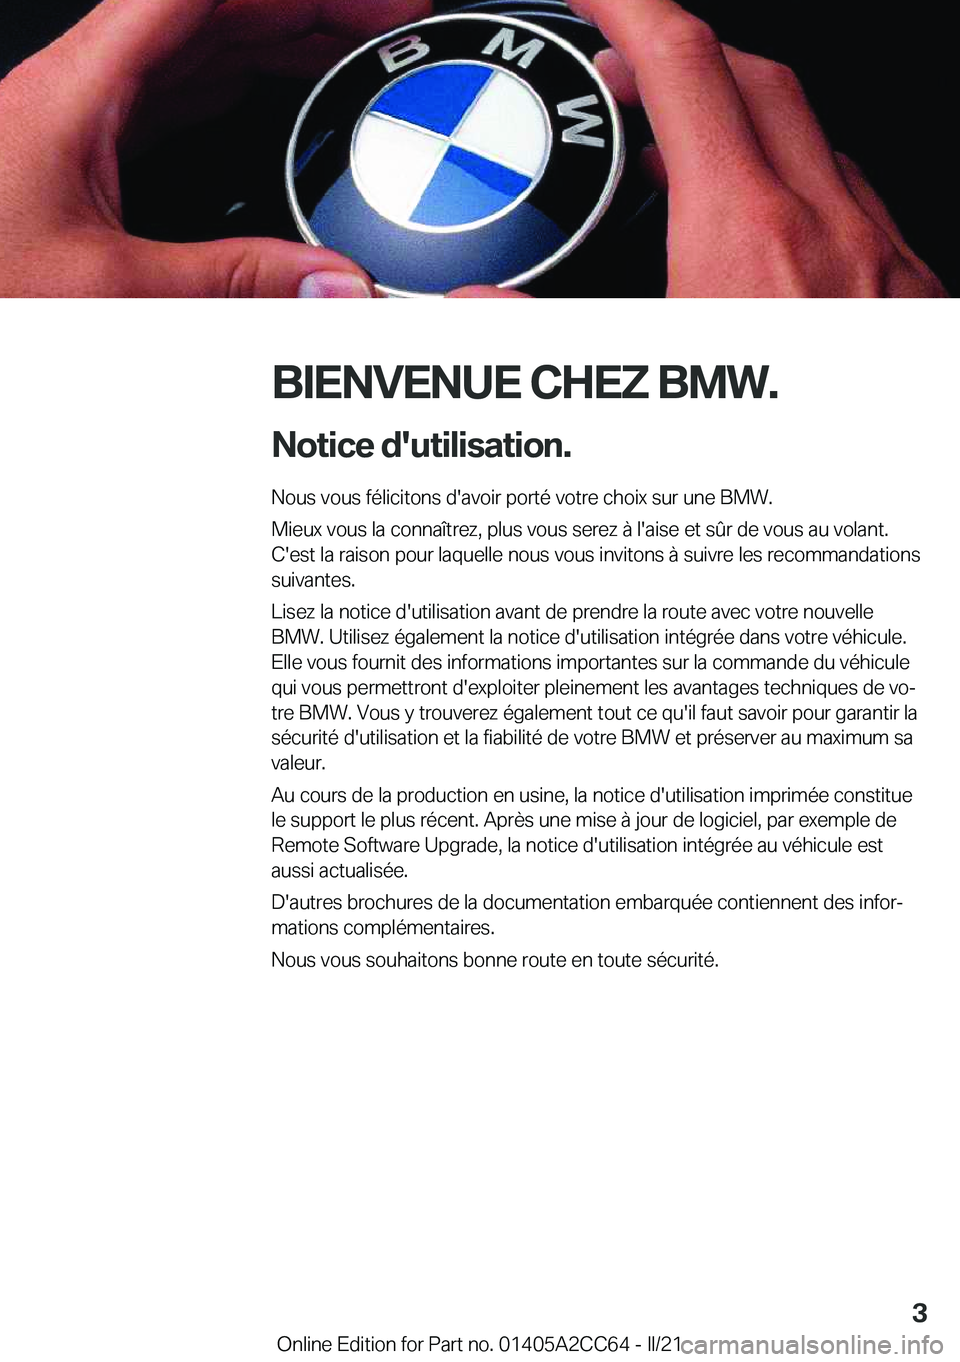 BMW 8 SERIES GRAN COUPE 2022  Notices Demploi (in French) �B�I�E�N�V�E�N�U�E��C�H�E�Z��B�M�W�.�N�o�t�i�c�e��d�'�u�t�i�l�i�s�a�t�i�o�n�.
�N�o�u�s��v�o�u�s��f�é�l�i�c�i�t�o�n�s��d�'�a�v�o�i�r��p�o�r�t�é��v�o�t�r�e��c�h�o�i�x��s�u�r��u�n�e�